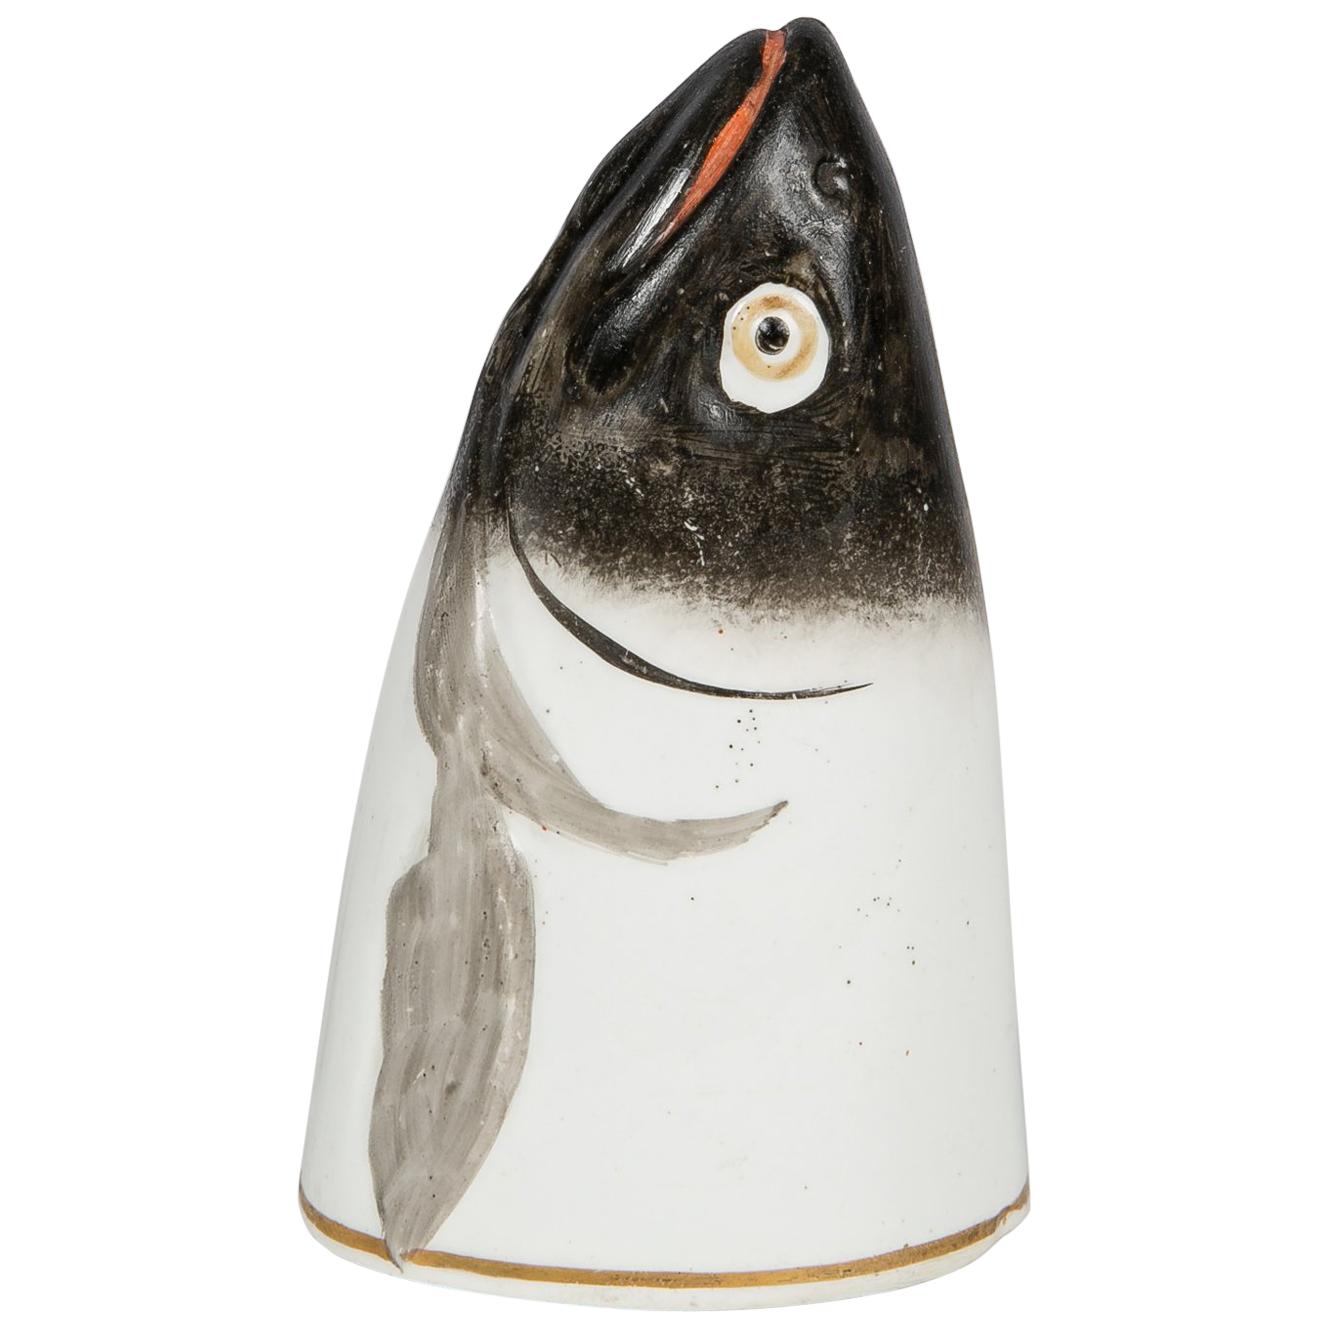 Stirrup Cup in the Form of a Fish